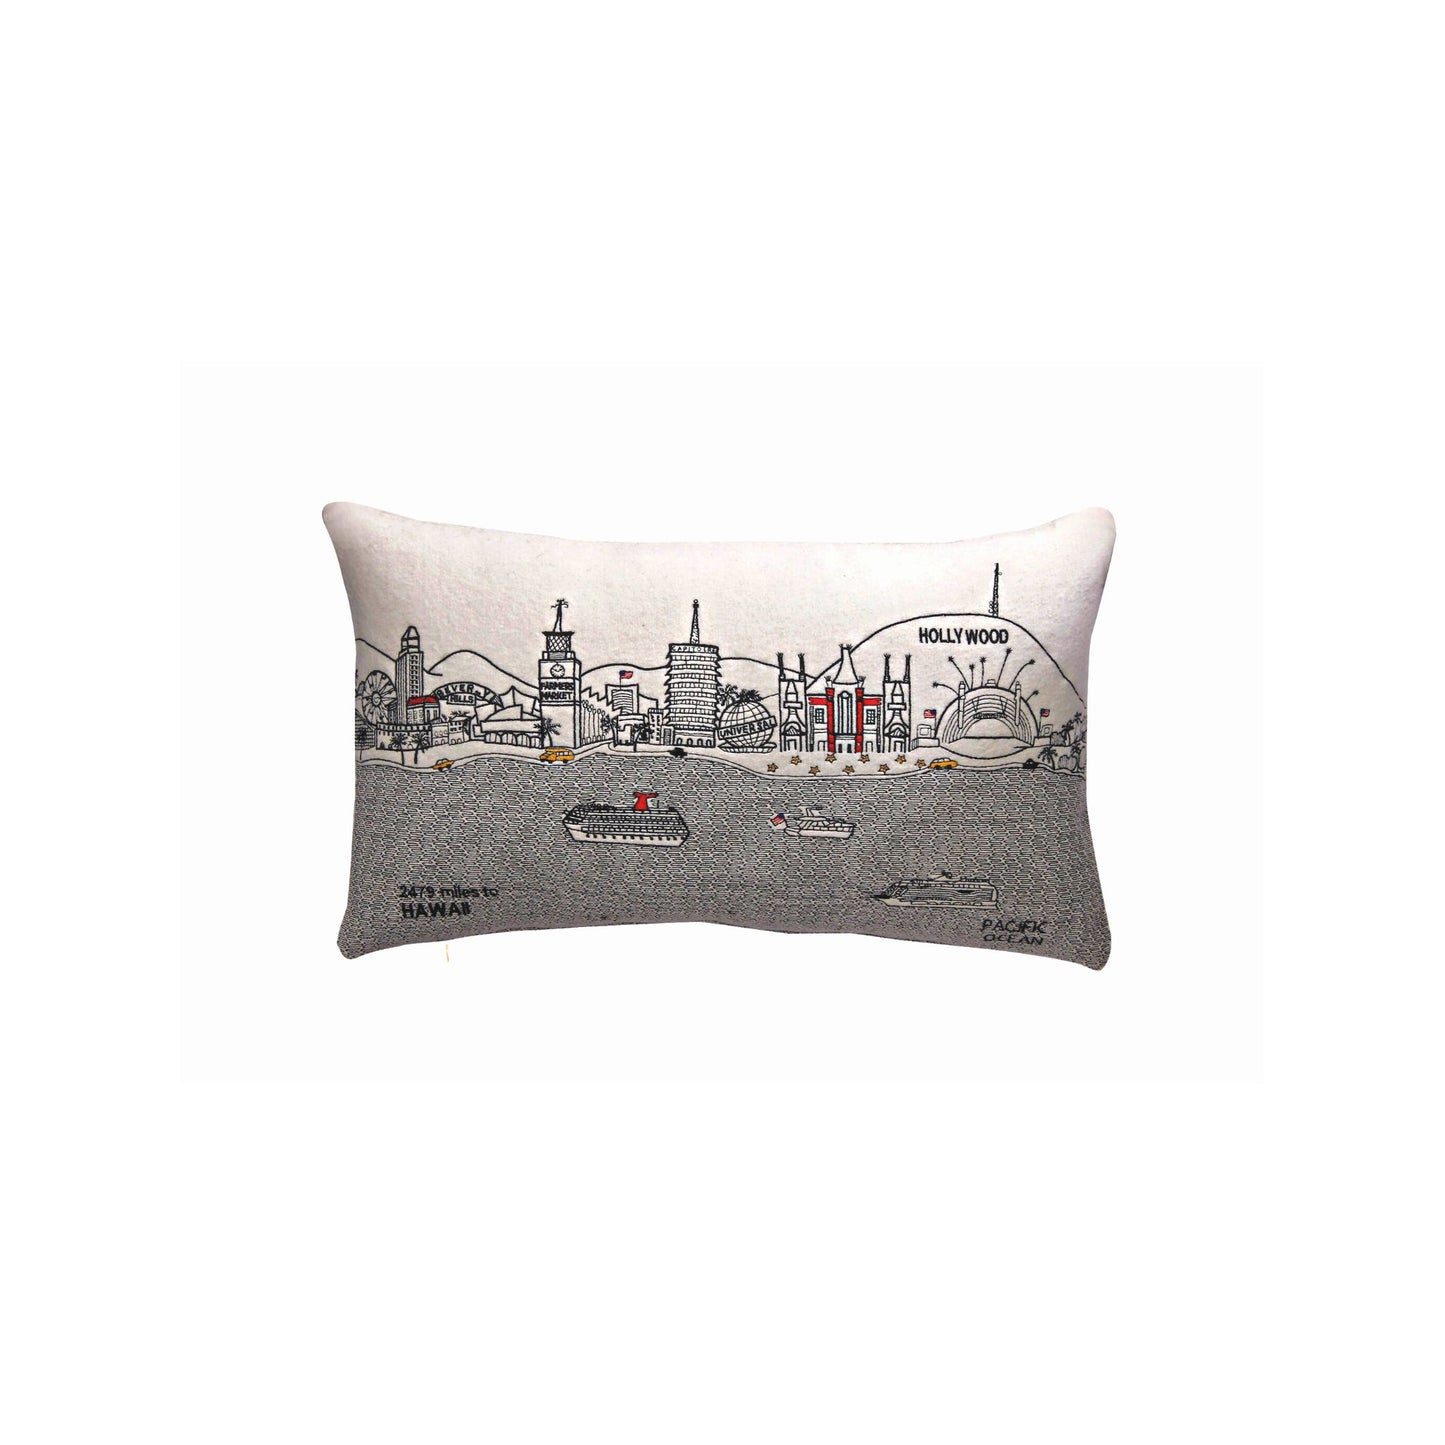 Los Angeles Day Prince Pillow